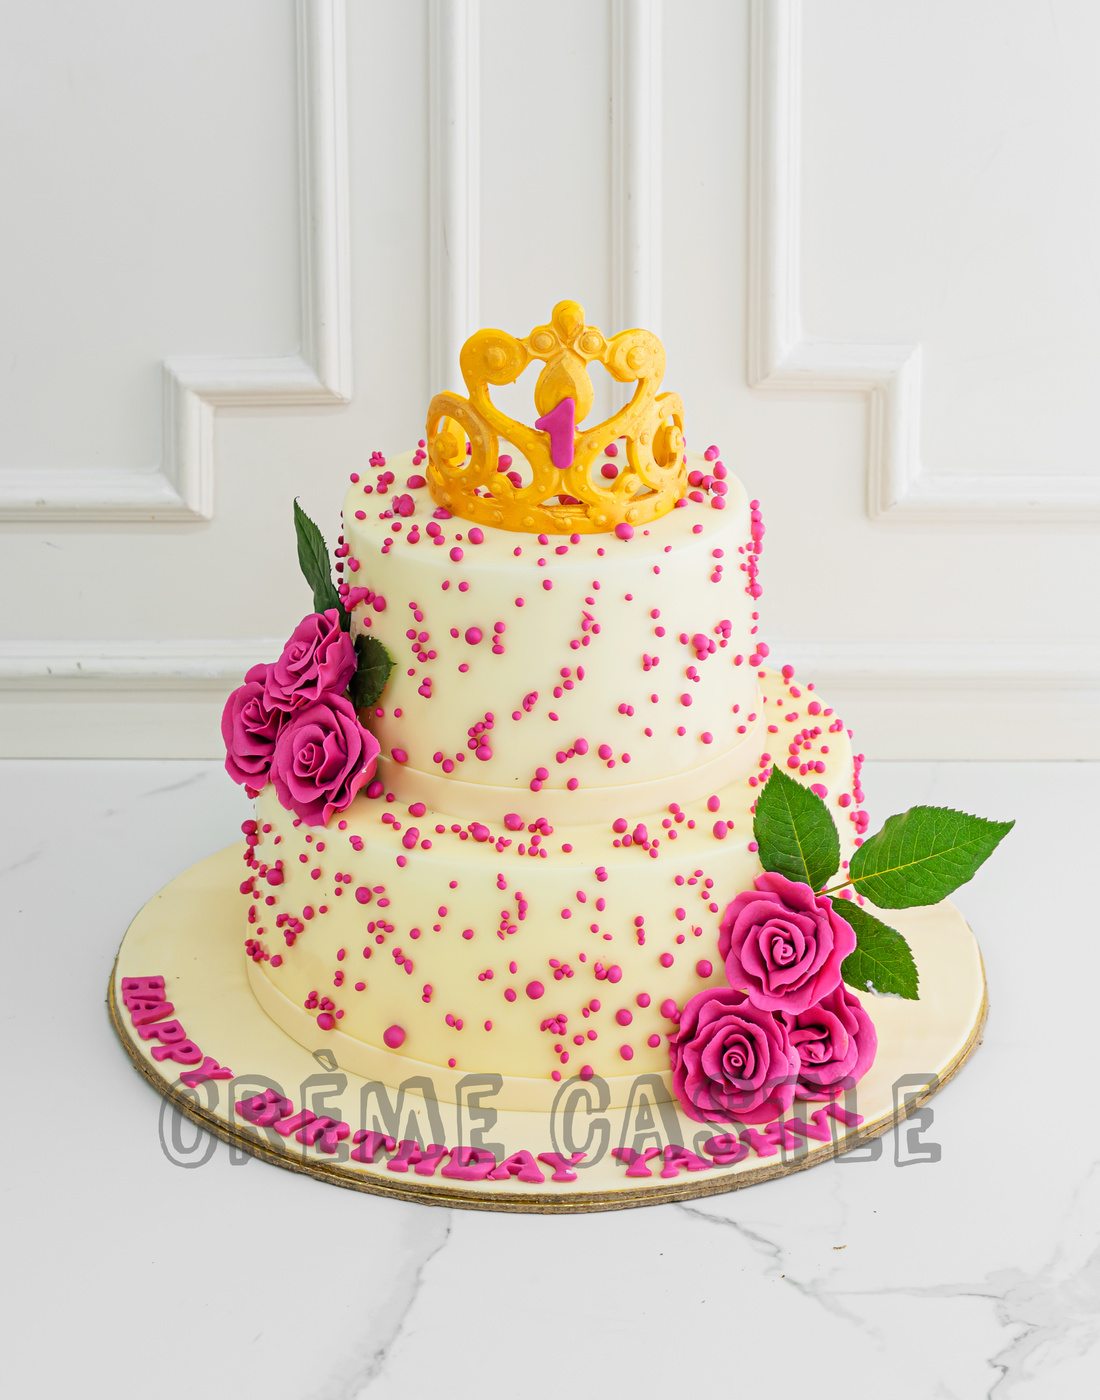 18th Birthday Cake - Buy Online, Free UK Delivery — New Cakes